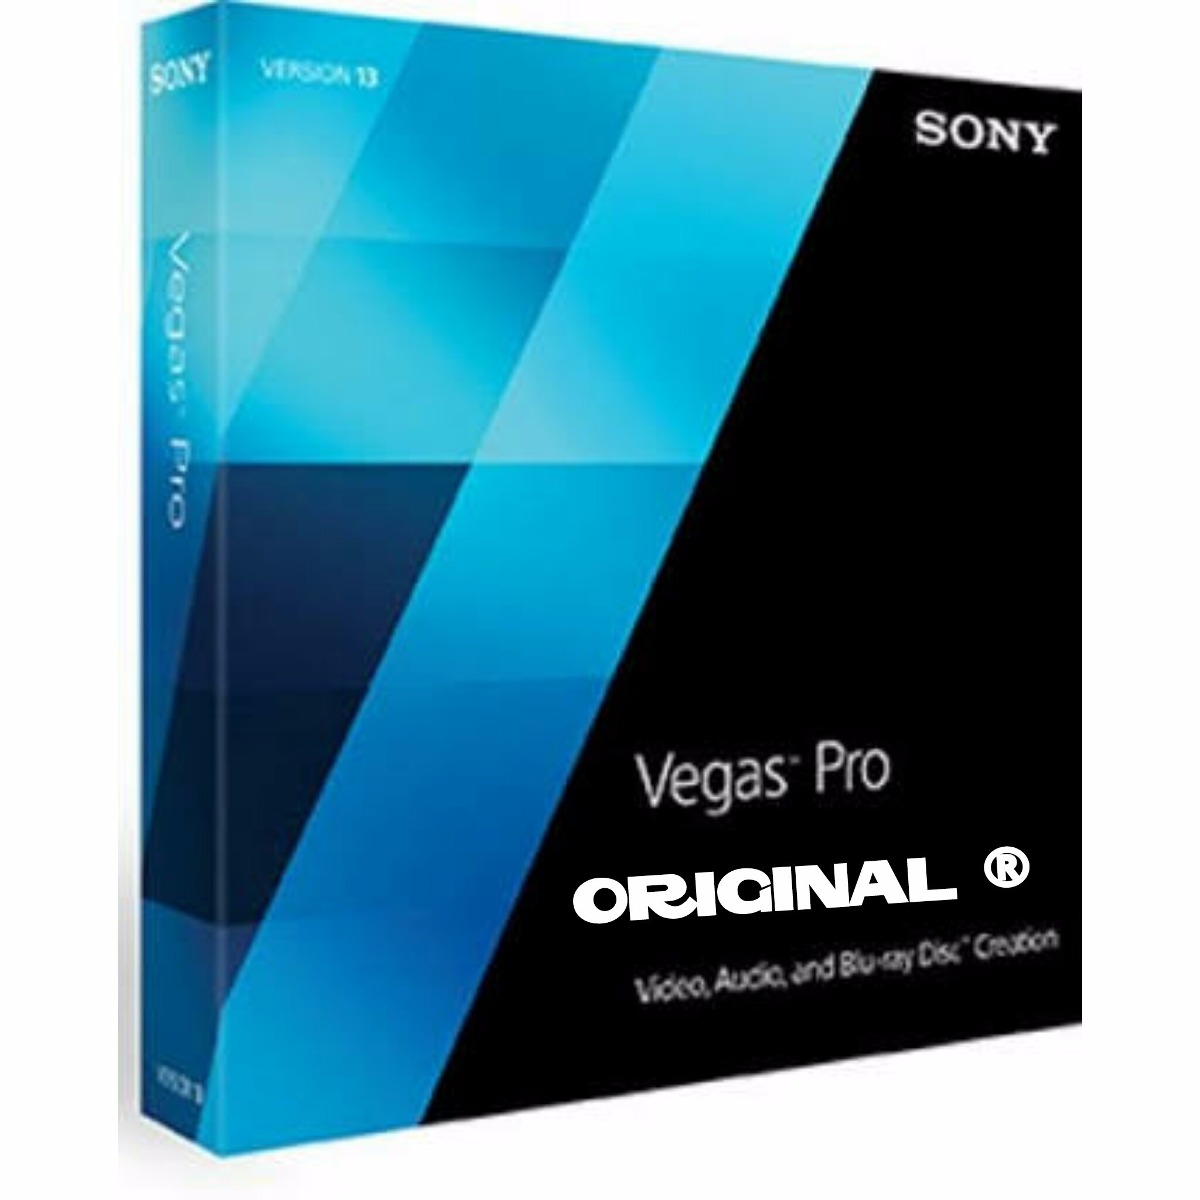 Sony vegas pro x64 download using sketchup free after pro